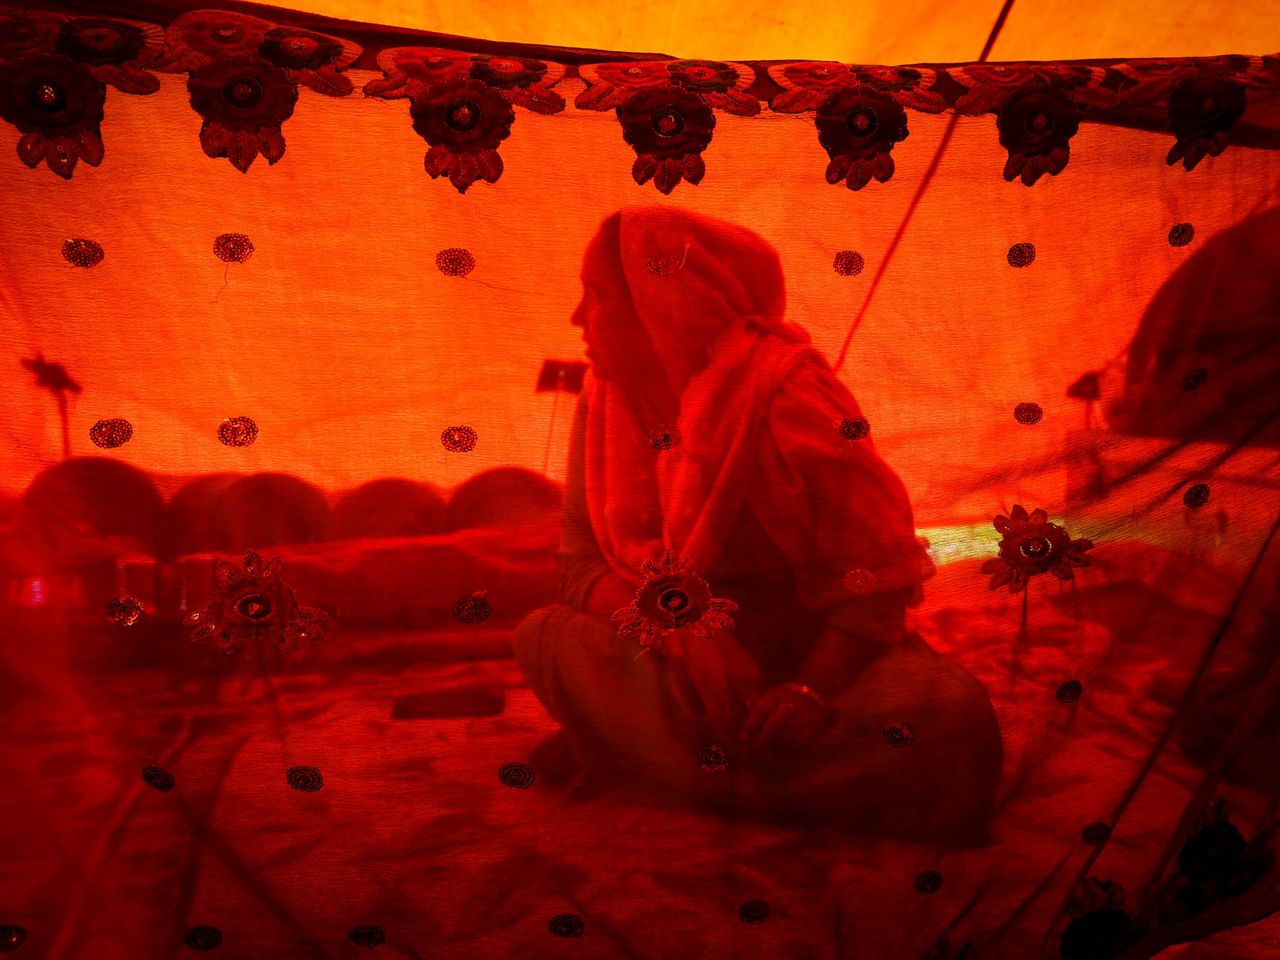 Razia, 35, a member of the Bakarwal tribal community, in her tent. She had travelled for days and has had bad experiences of travelling during her menstruation. The 200-kilometre journey takes a month and involves trekking through high mountain passes populated by potentially dangerous wild animals. Date: 27 April, 2022.